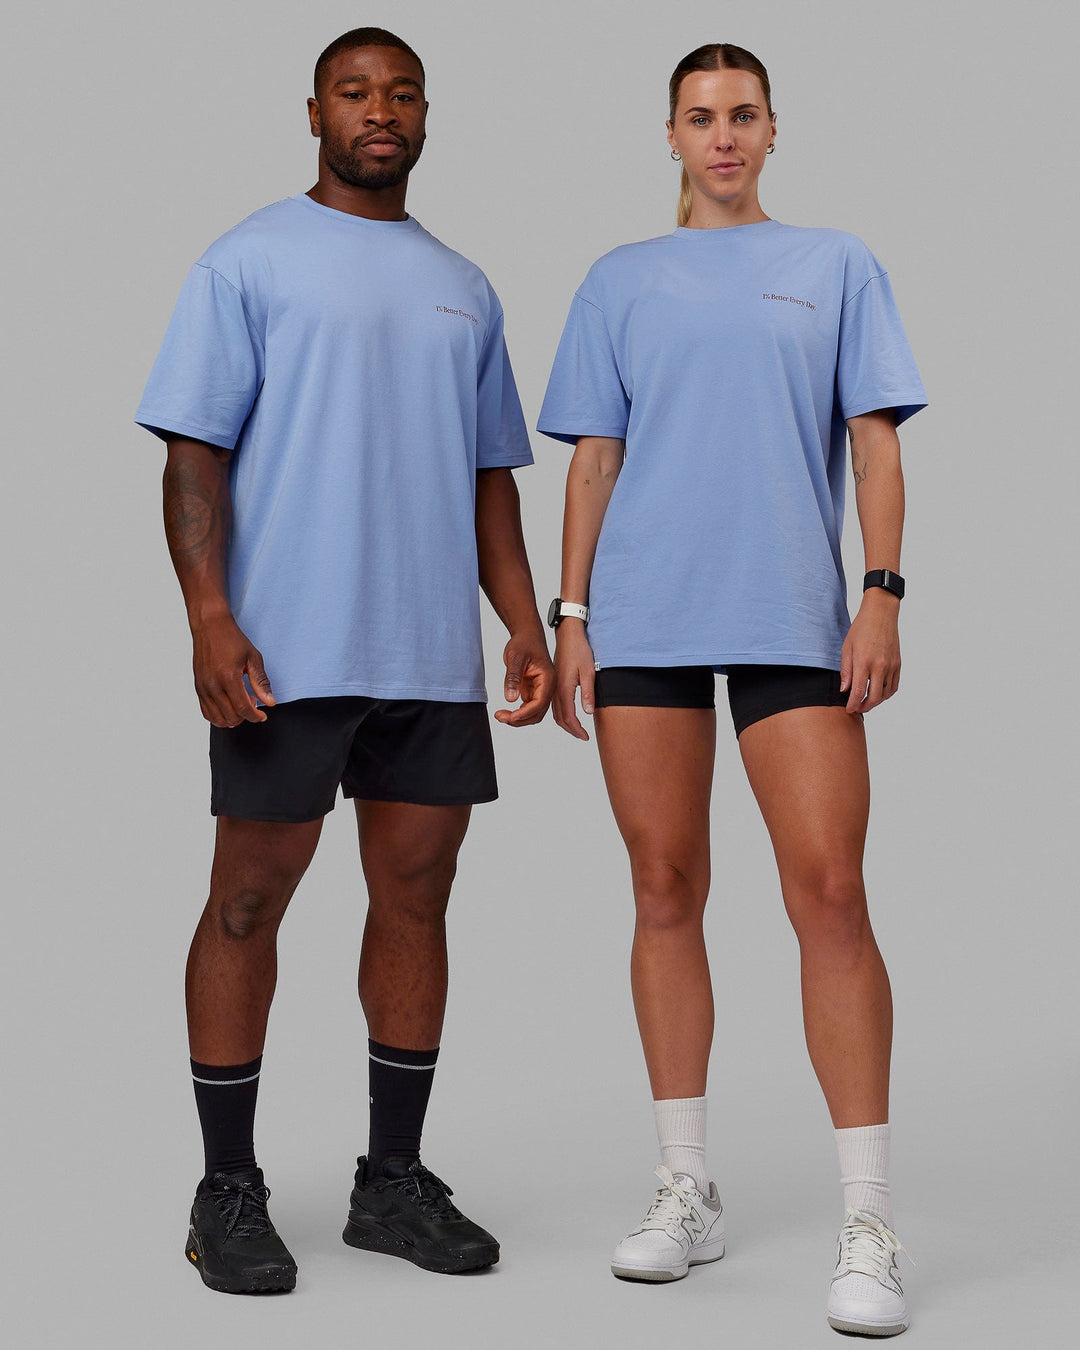 Duo wearing Unisex Better Every Day FLXCotton Tee Oversize - Arctic Blue-Ultra Pink